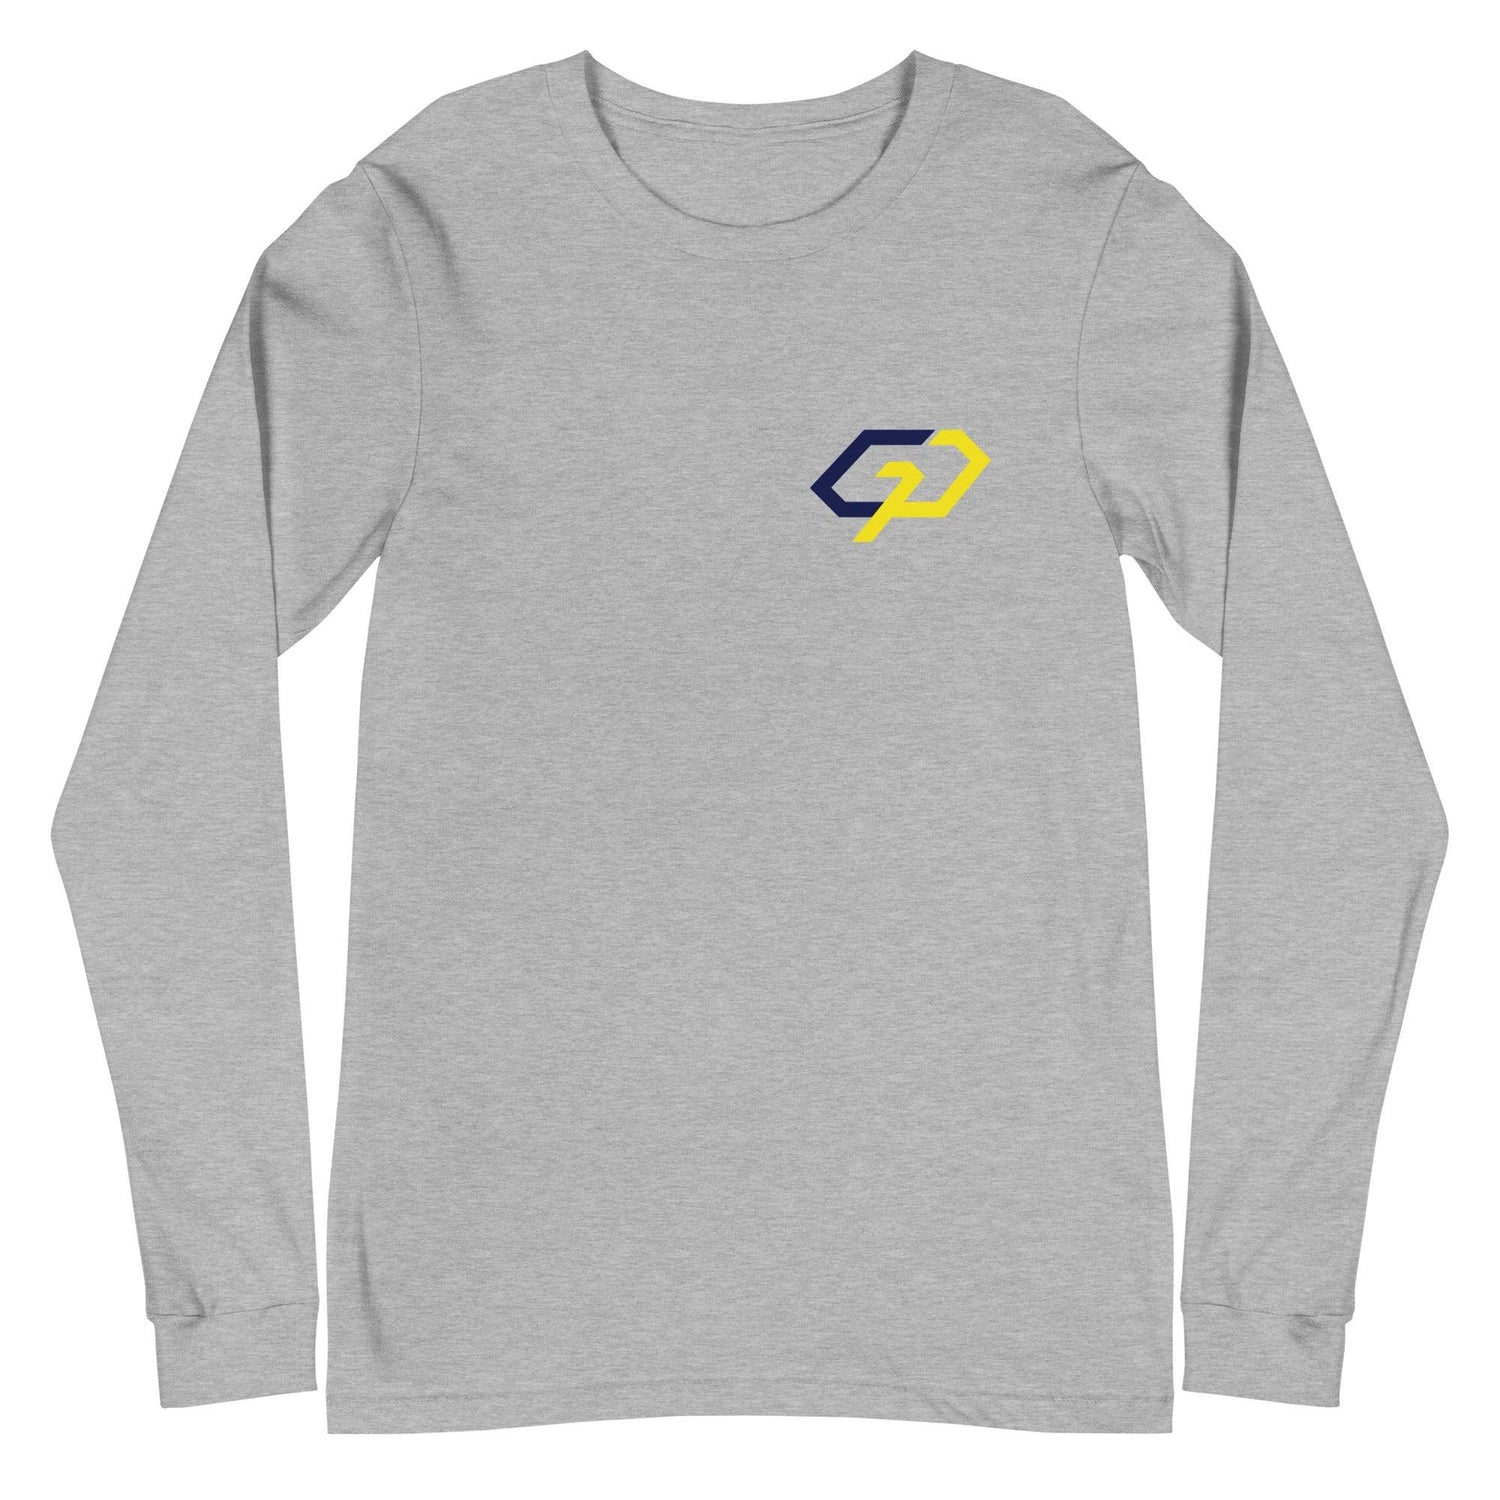 Gregory Pace "Signature" Long Sleeve Tee - Fan Arch